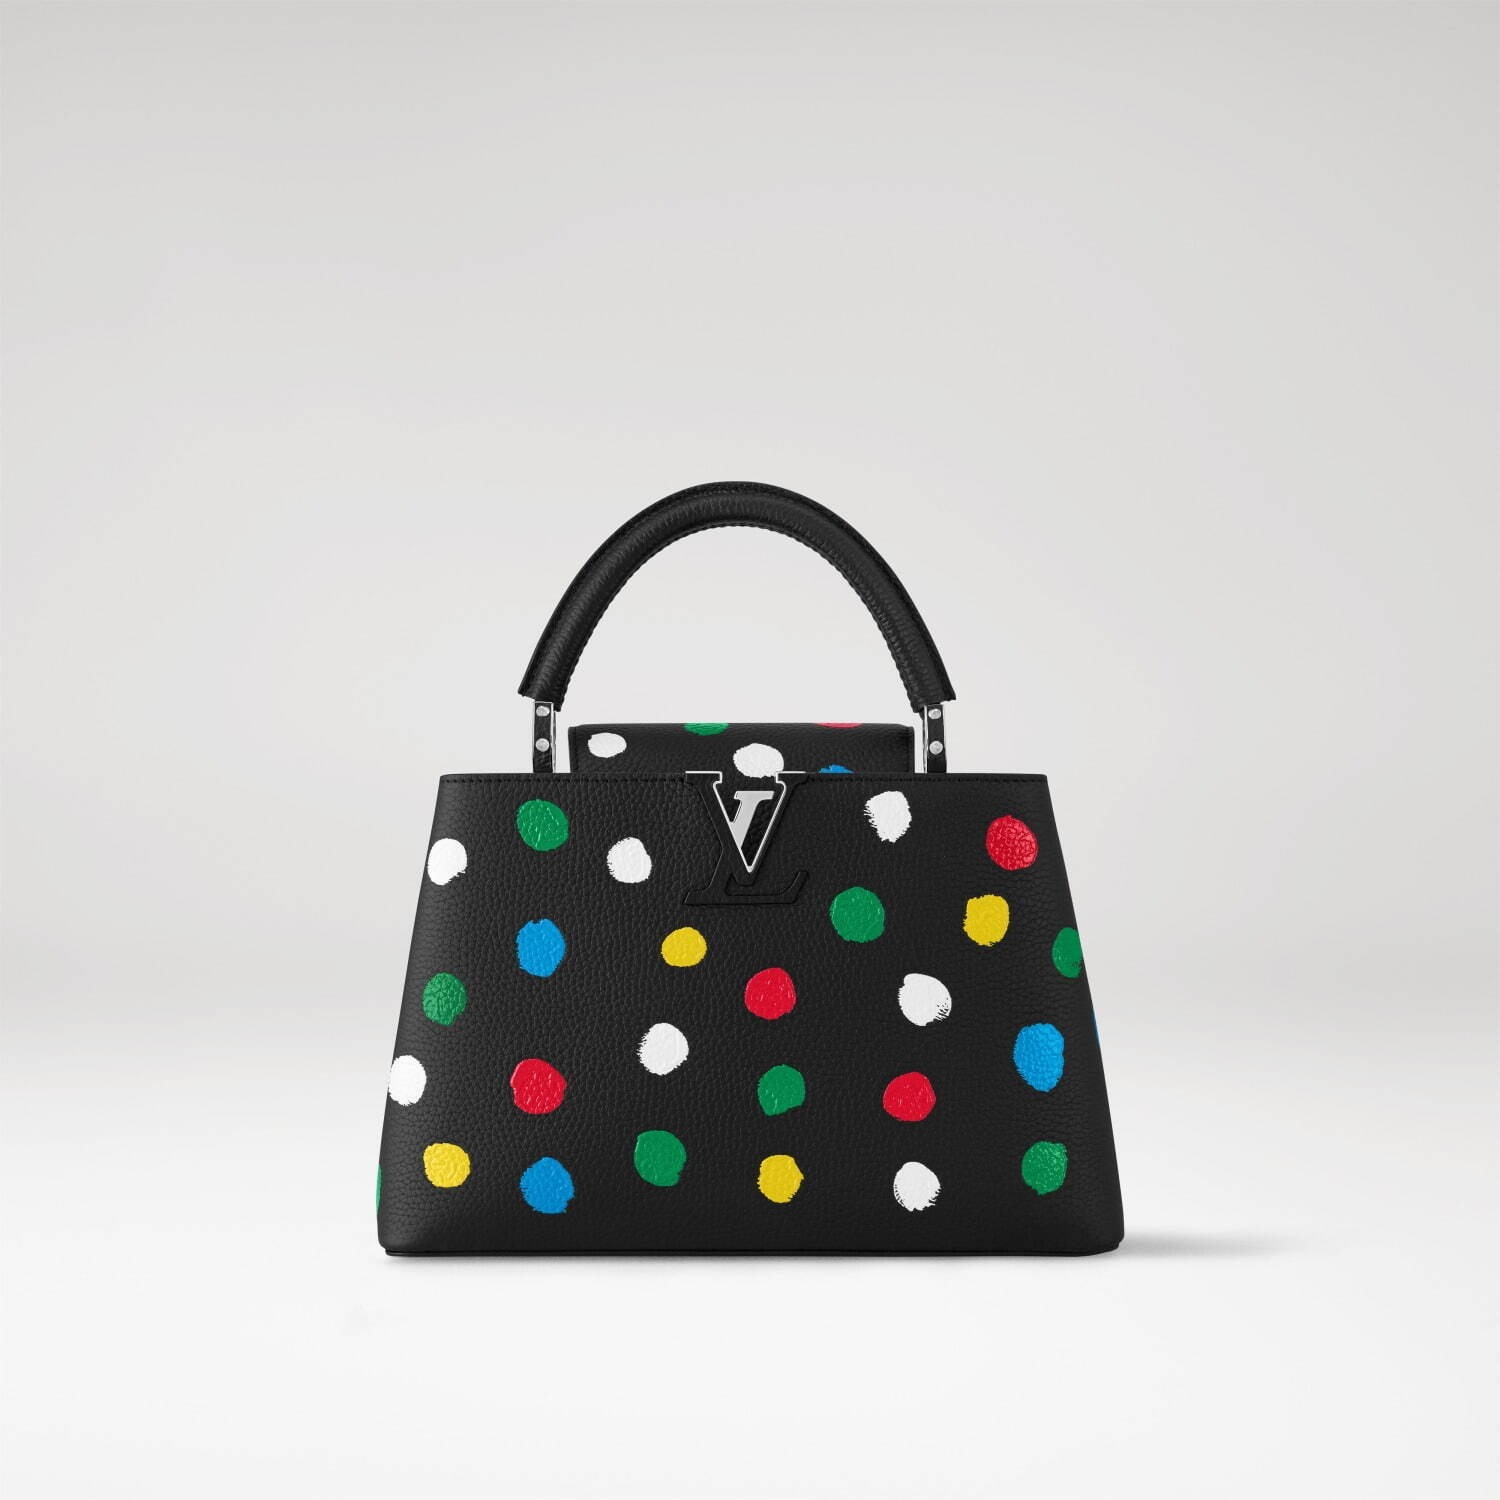 Louis Vuitton Teases Upcoming Collaboration With Yayoi Kusama